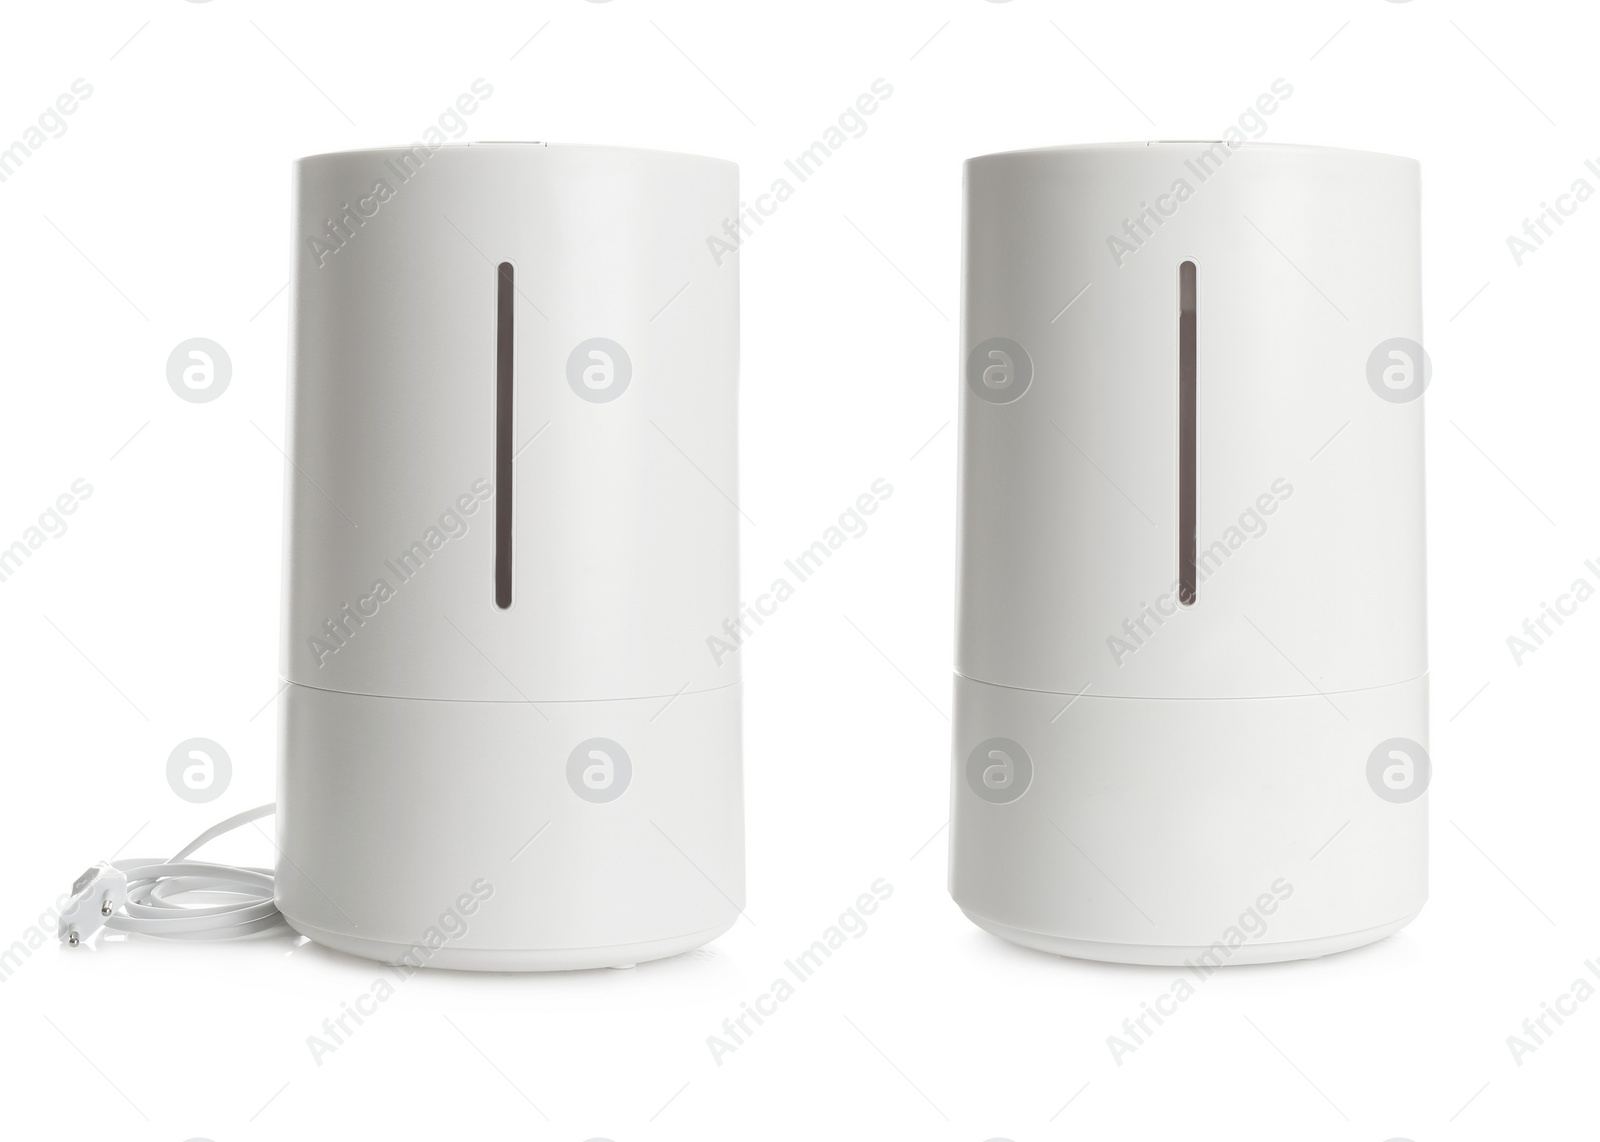 Image of Collage with modern air humidifier on white background